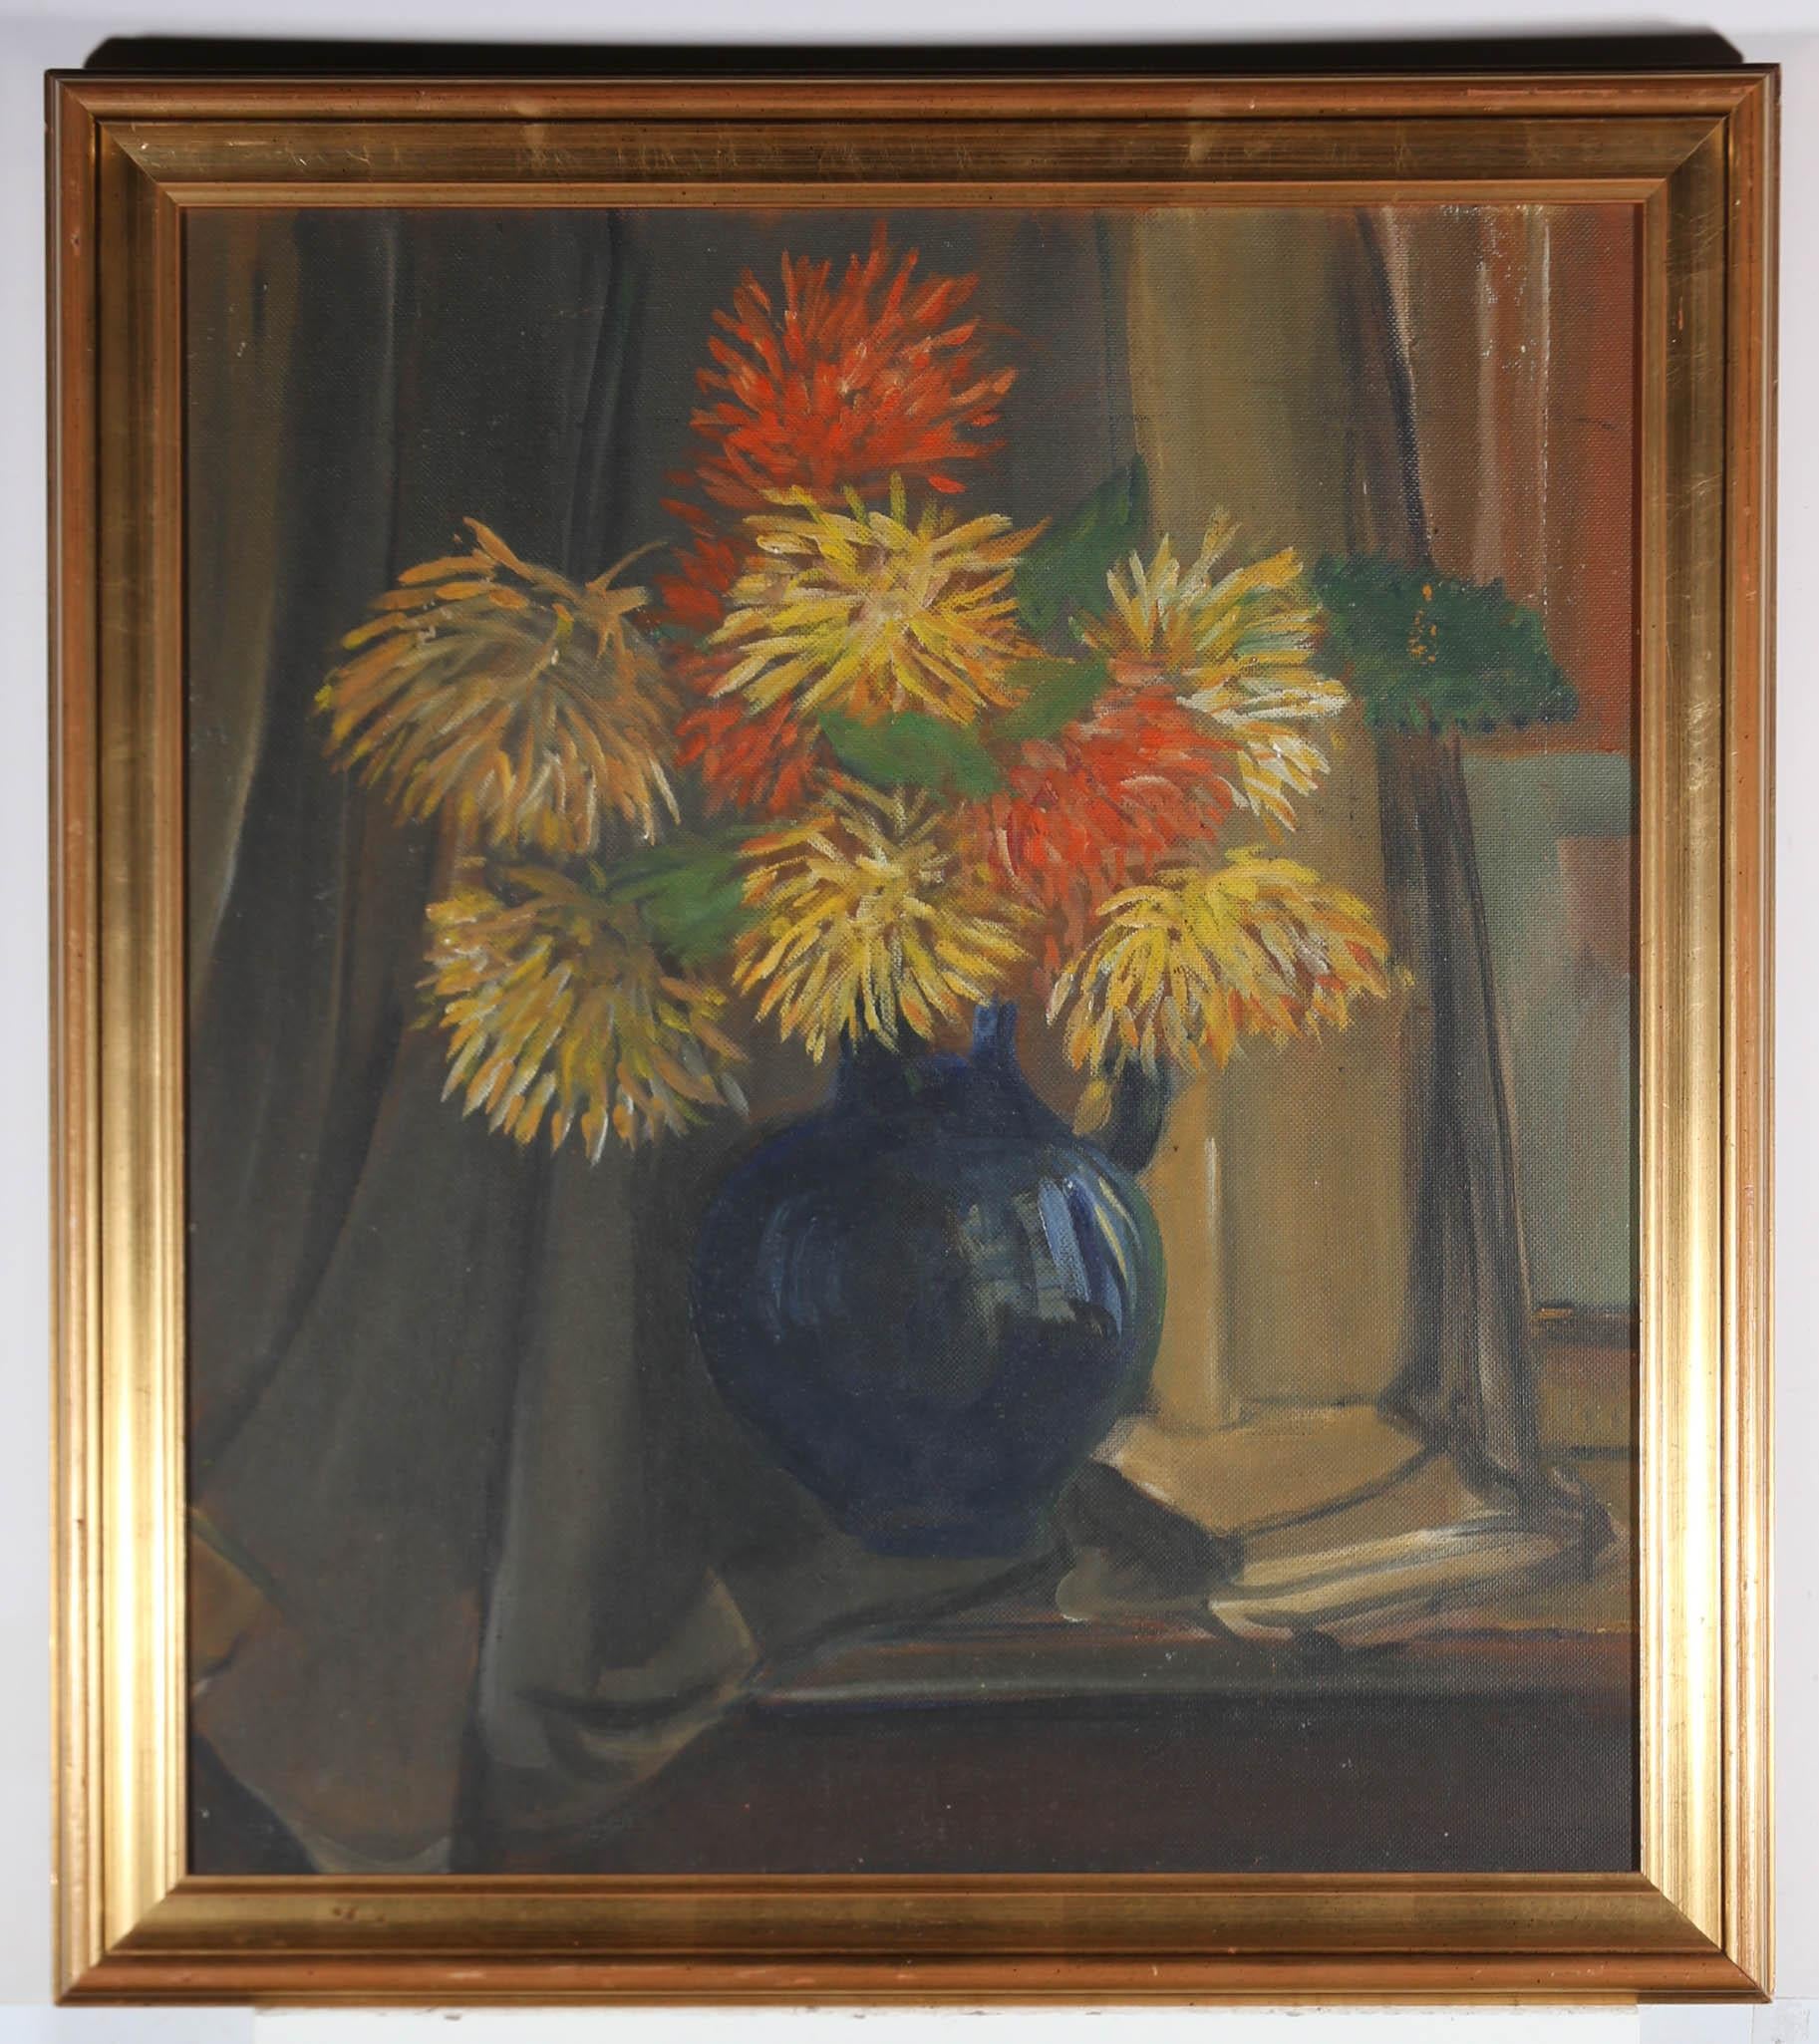 Luminous Dahlias sing brightly from a blue lustre vase, in this confident example of a floral still life. The artist has signed and titled the work to the reverse (illegibly), and the painting has been beautifully presented in a substantial